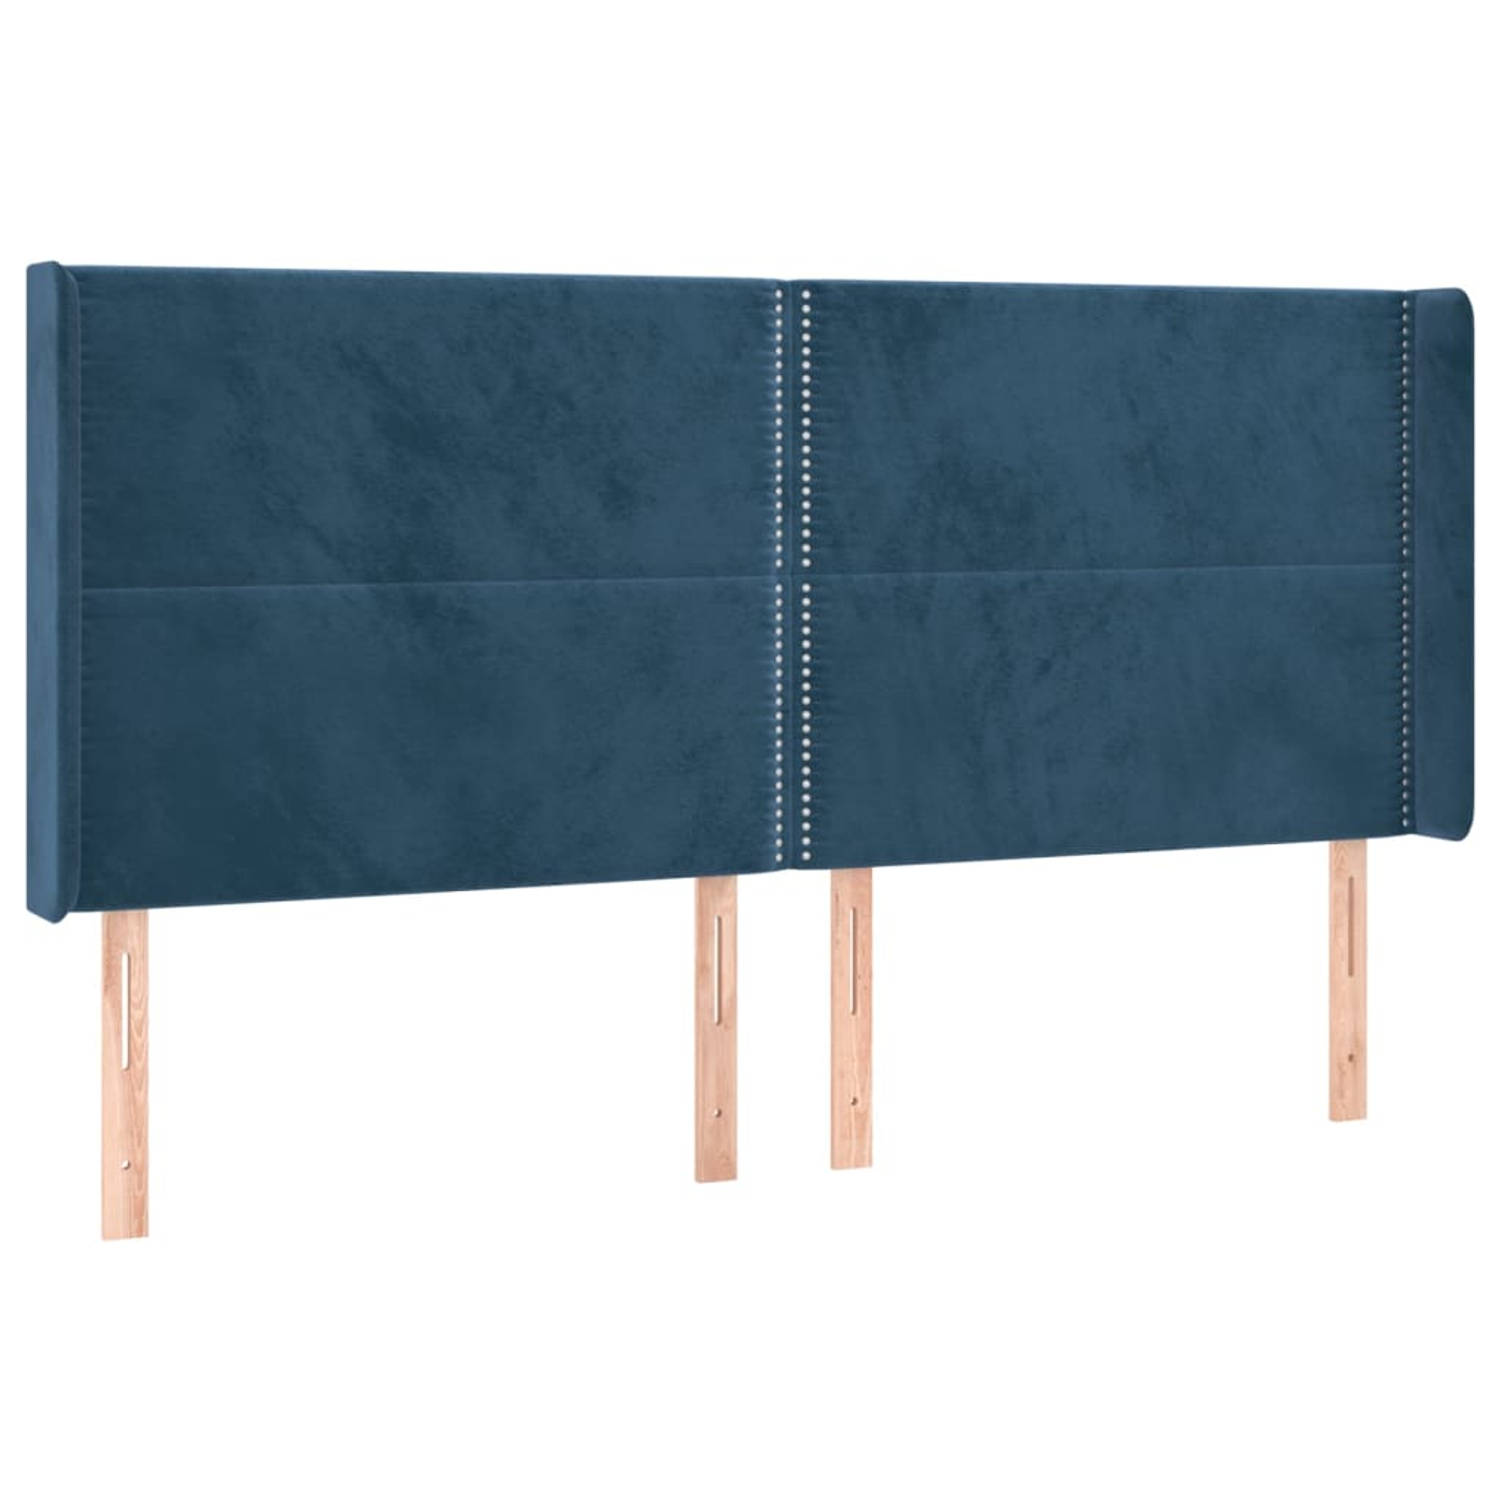 The Living Store Hoofdbord - Bedaccessoires - 203 x 16 x 118/128 cm - Donkerblauw